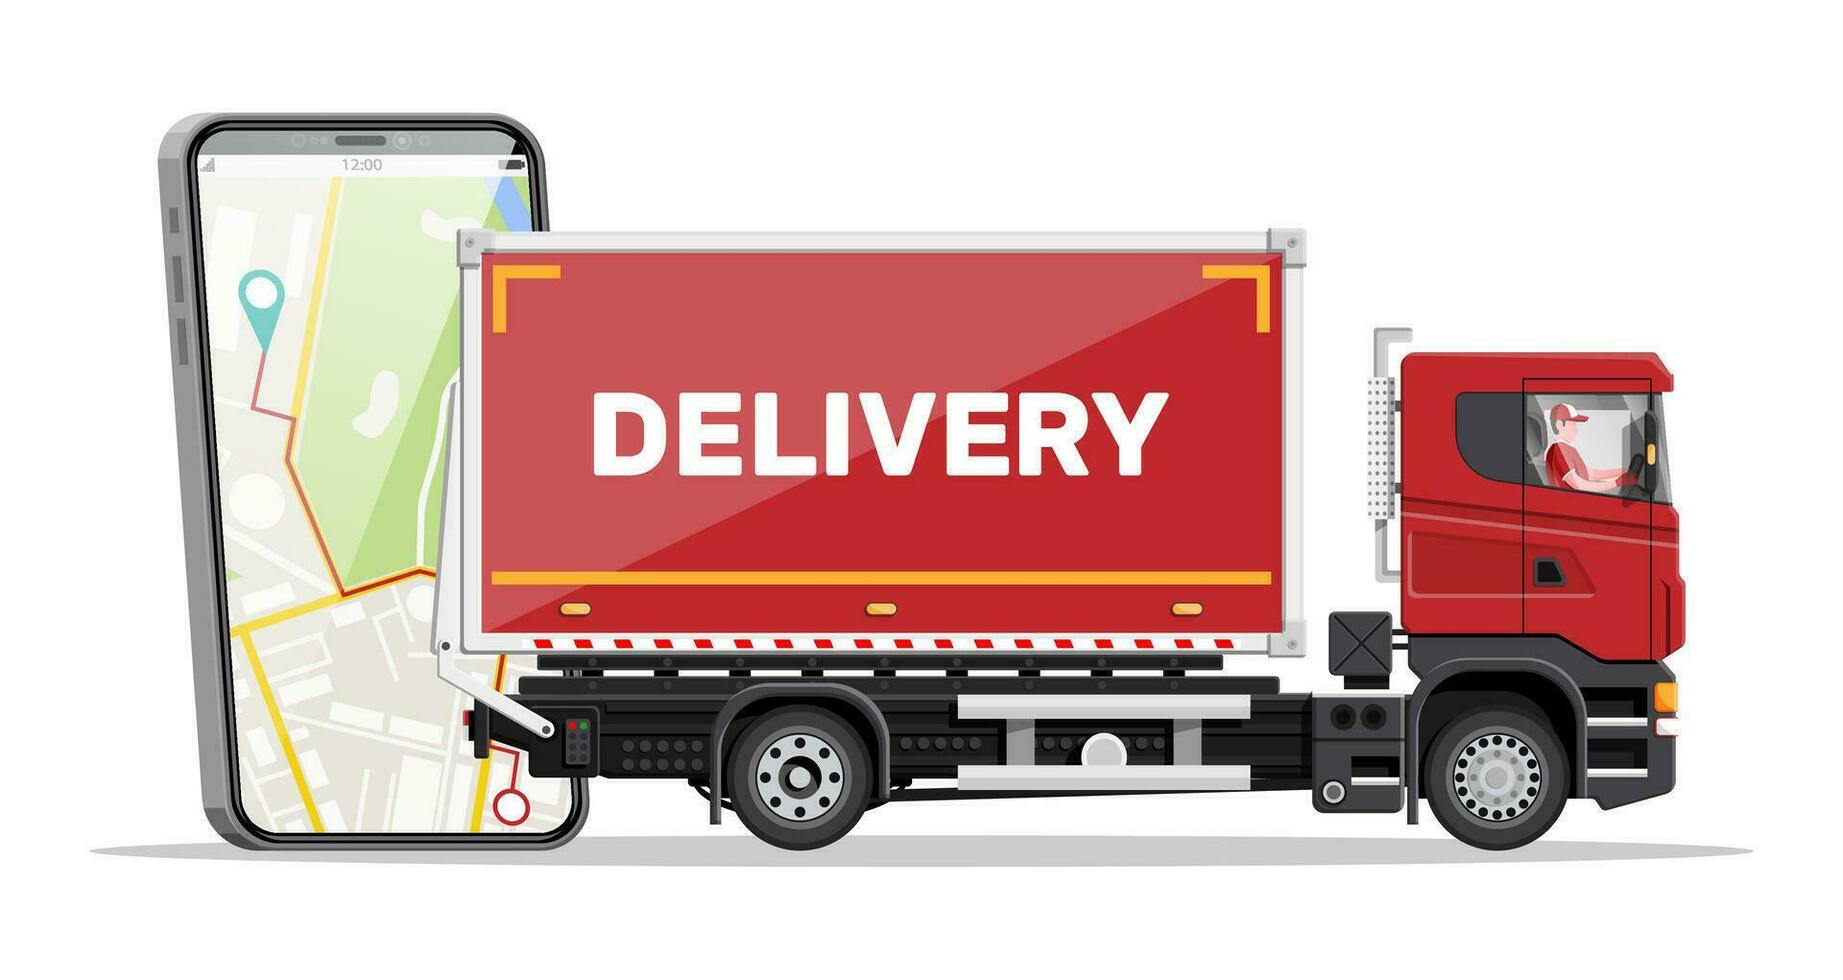 Red delivery van and smartphone with navigation app. Express delivering services commercial truck. Concept of fast and free delivery by car. Cargo and logistic. Cartoon flat vector illustration